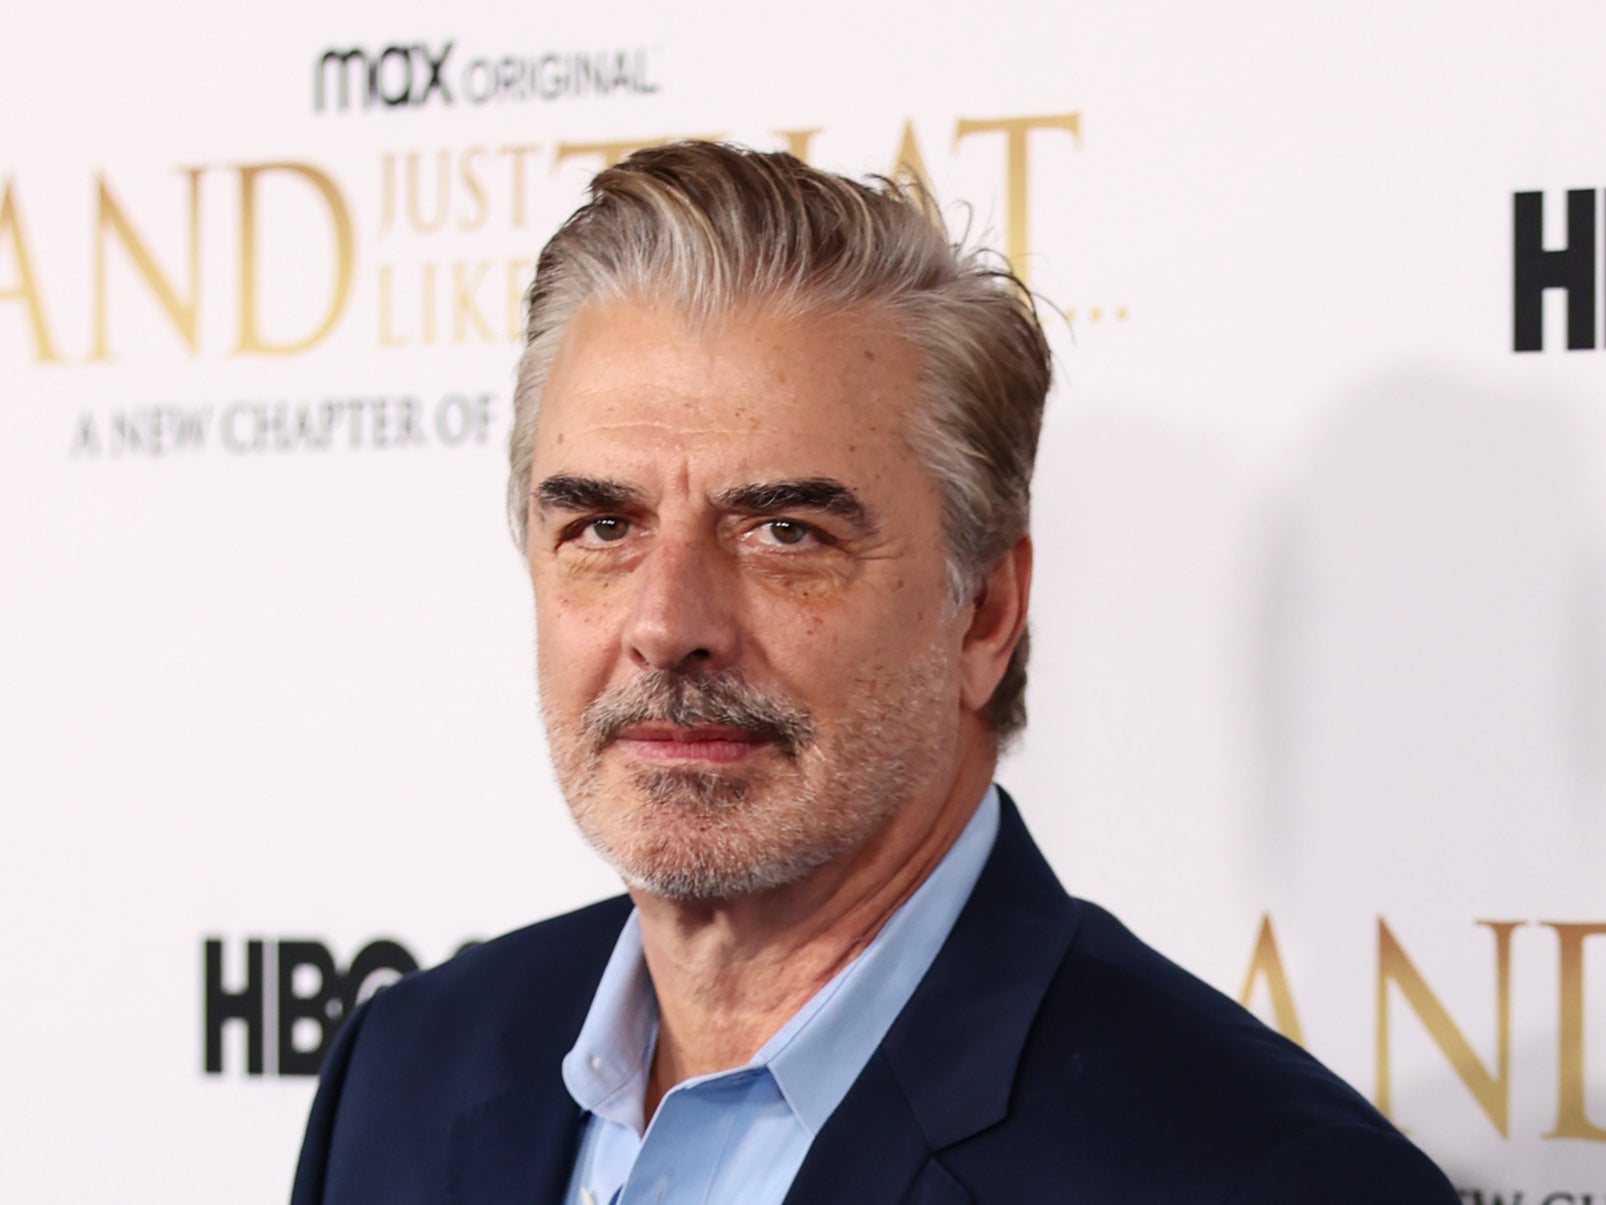 Chris Noth at the ‘And Just Like That’ premiere weeks before the allegations surfaced